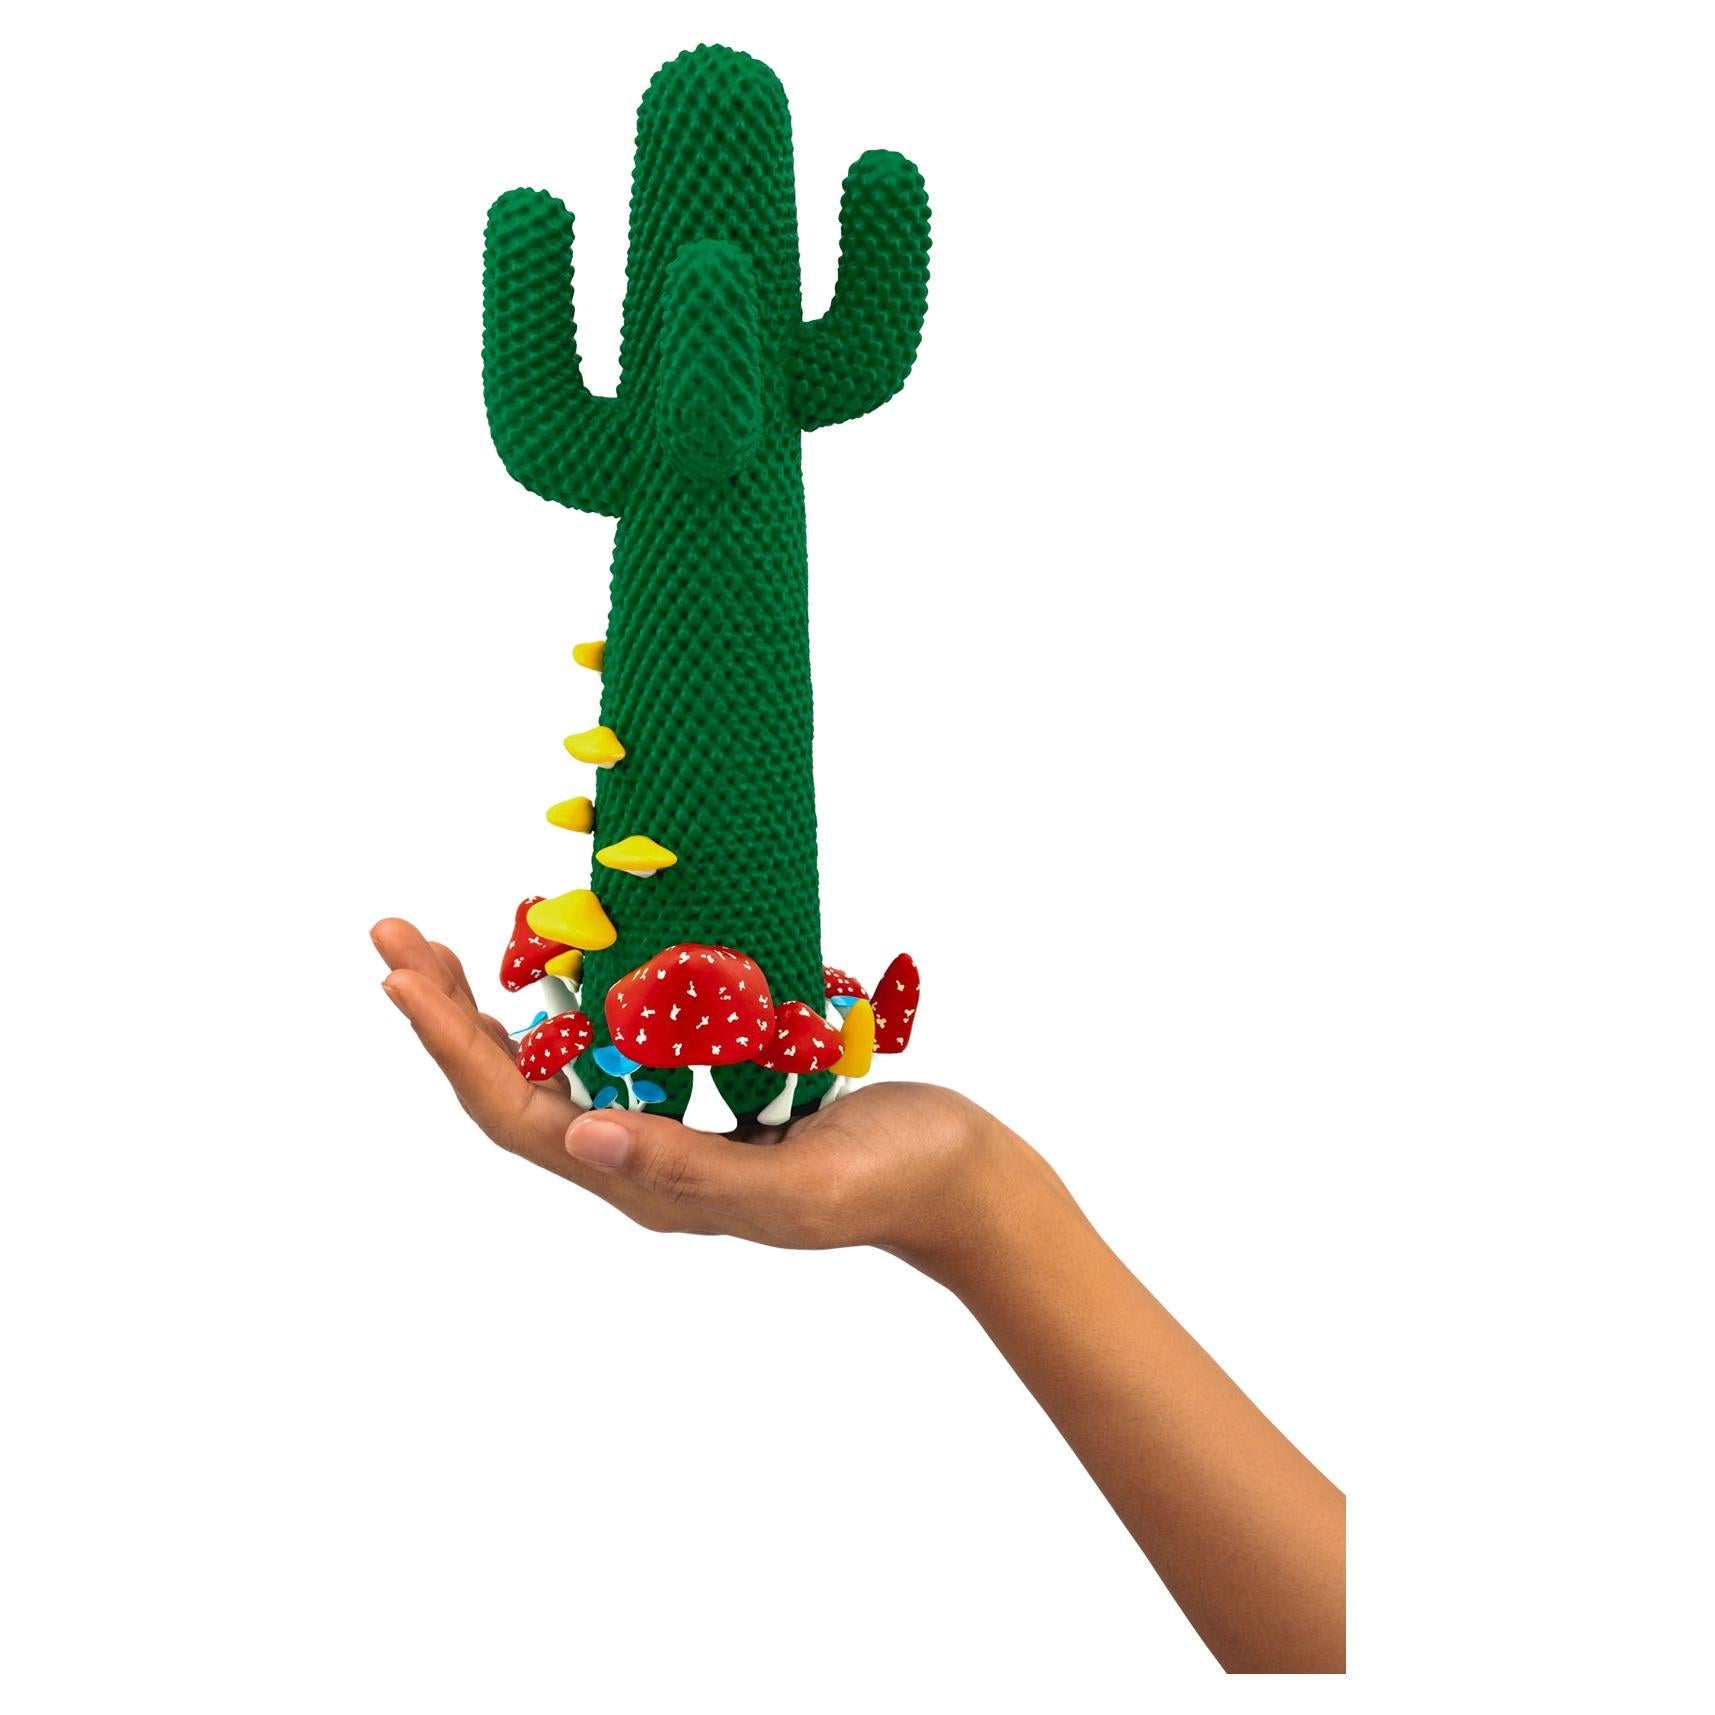 Limited Edition #27/99

Gufram presents the miniaturised version of the Shroom CACTUS® created in collaboration with A$AP Rocky and the artist’s new design studio HOMMEMADE Exactly as the real-size Shroom CACTUS®, the new Guframini piece features